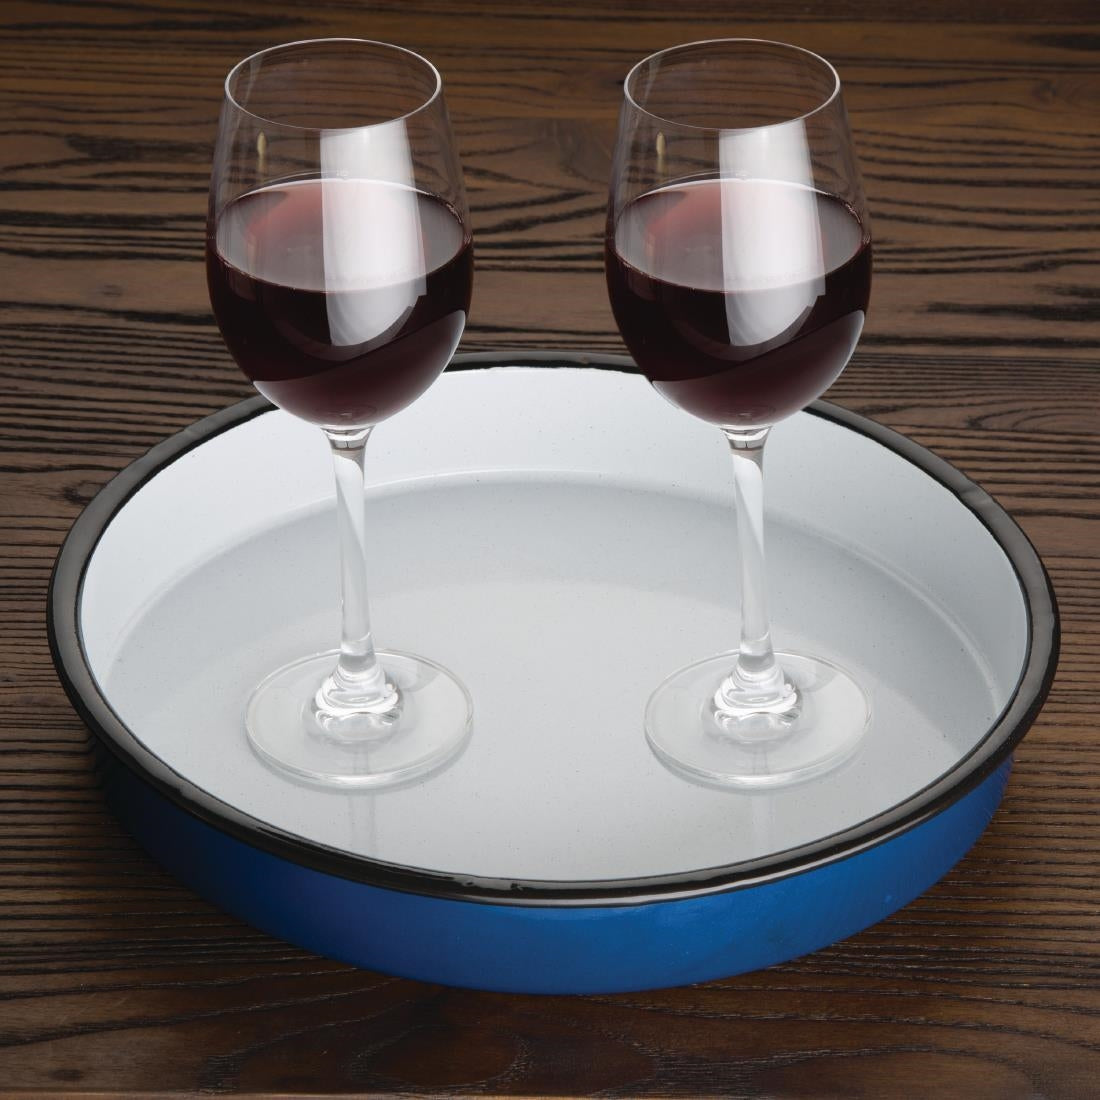 GM240 Olympia Enameled Steel Round Service Tray 320mm JD Catering Equipment Solutions Ltd